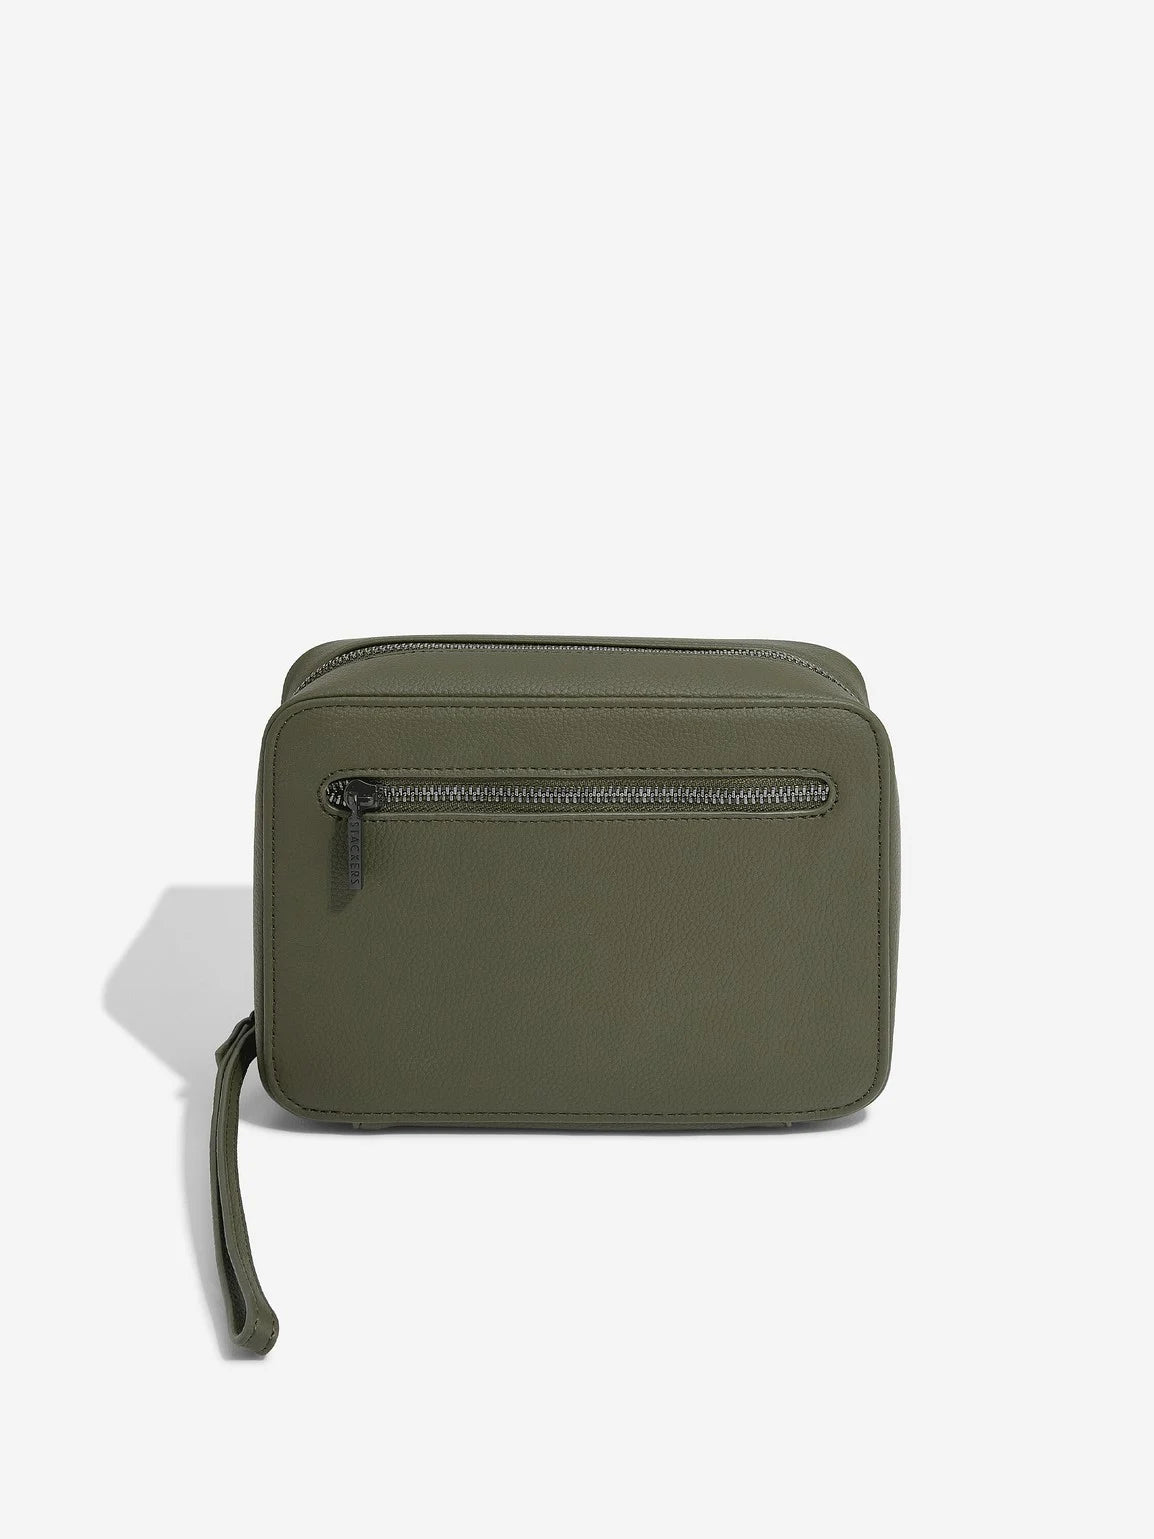 Stackers. Olive Green Cable Tidy - timeframedclocks